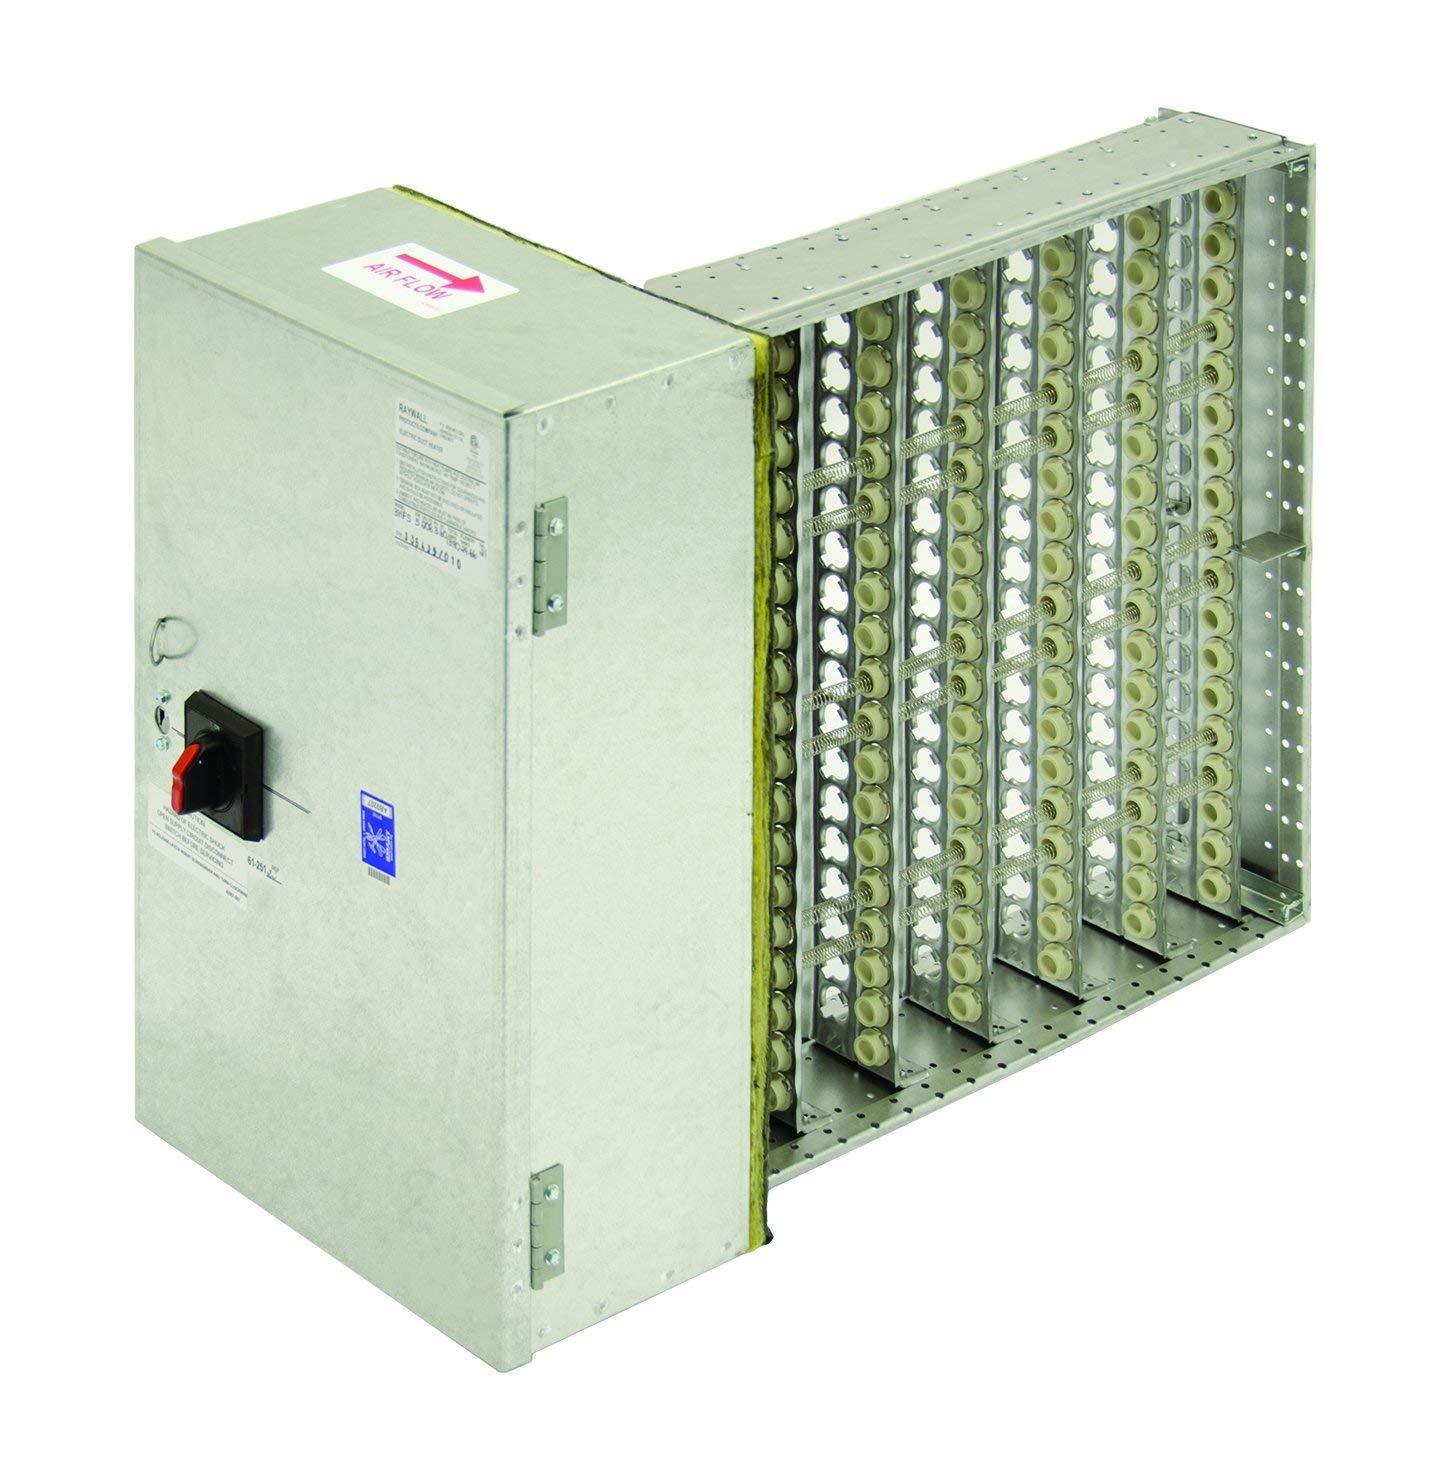 TPI 30KW 480V Packaged Duct Heater - 4PD30241633